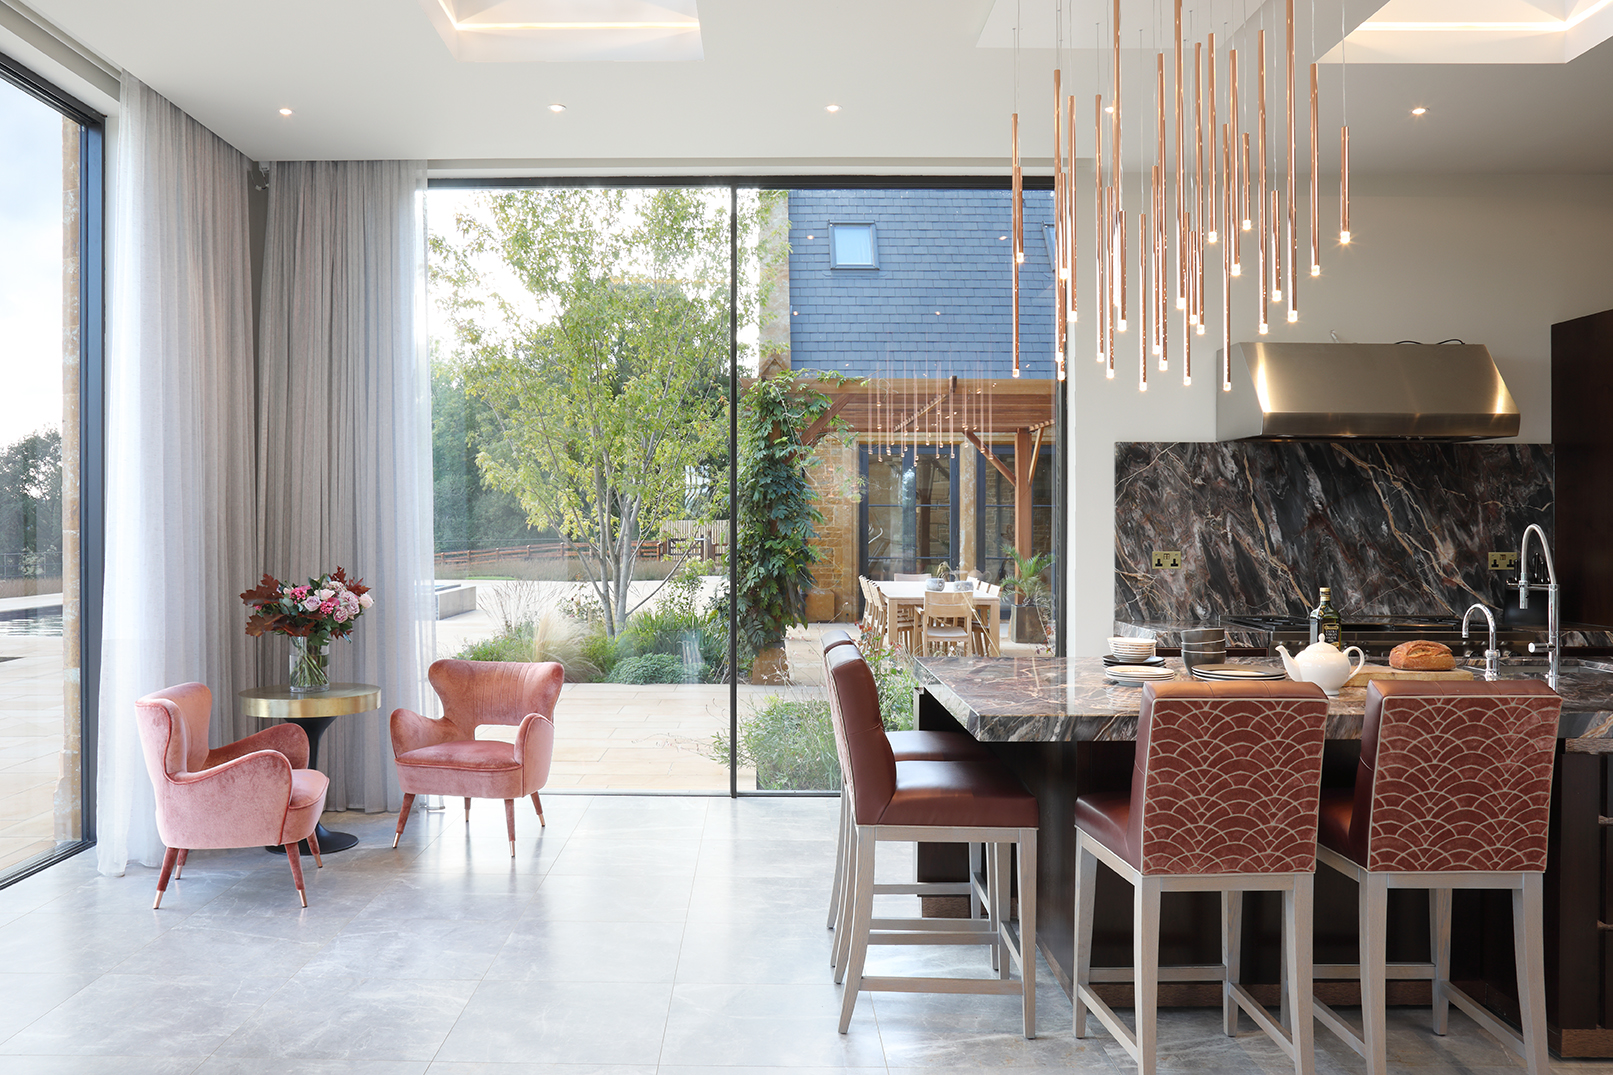 Brown marble kitchen with terracotta coloured upholstered barstools at central island. Full height sliding glass doors framed by sheer curtains frame the garden beyond.